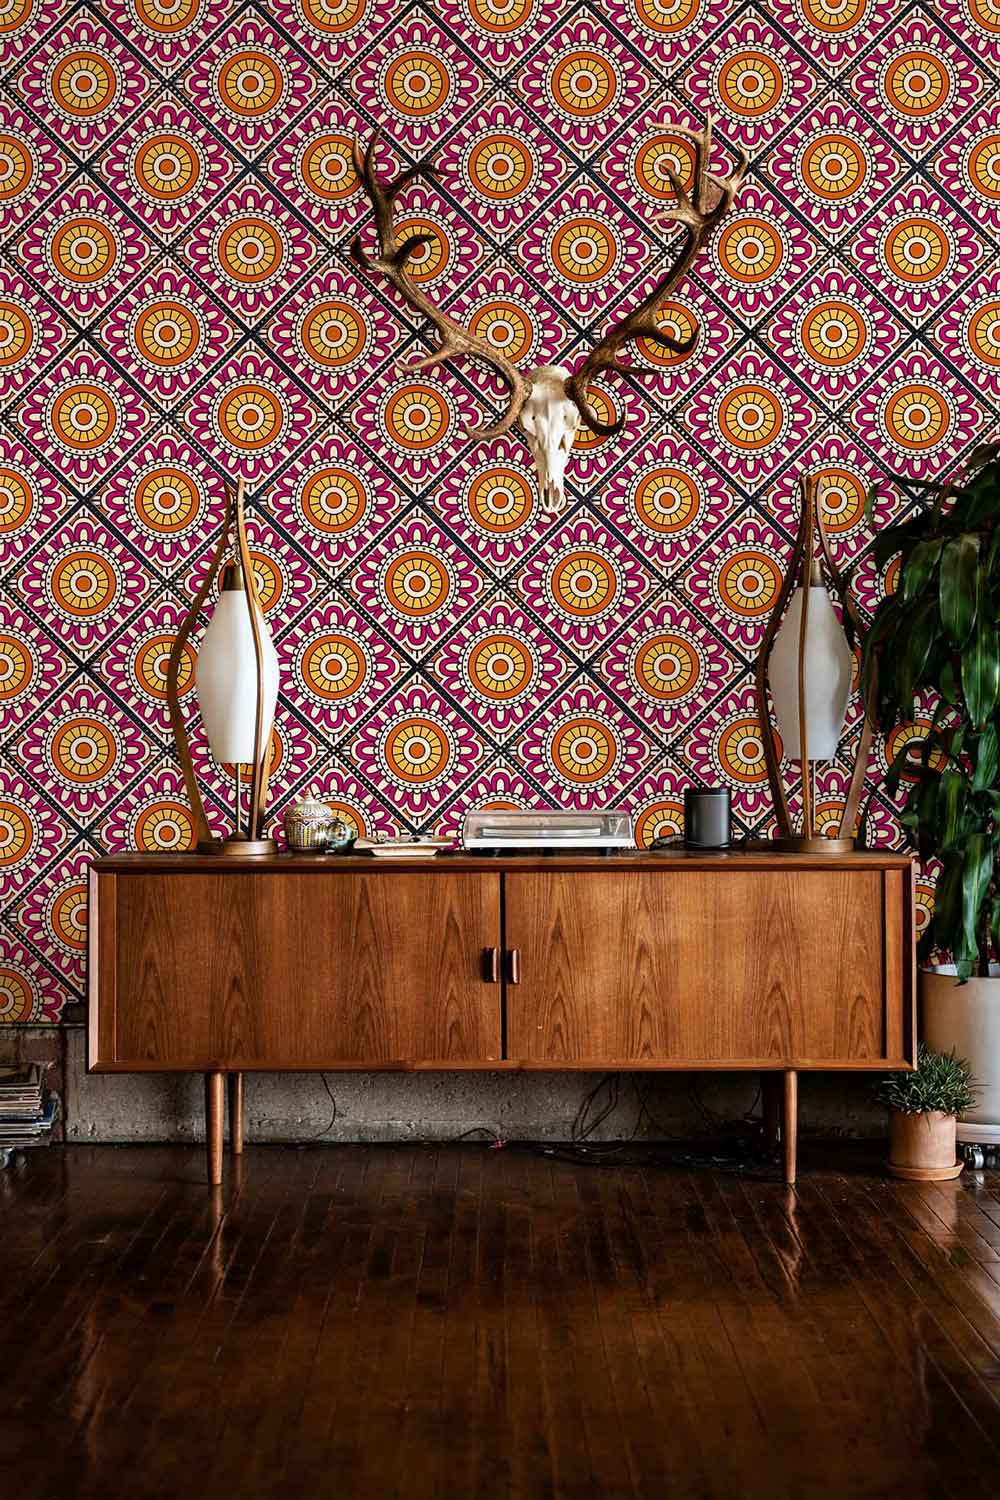 In order to decorate a hallway, choose red wallpaper murals with repeating floral motifs.